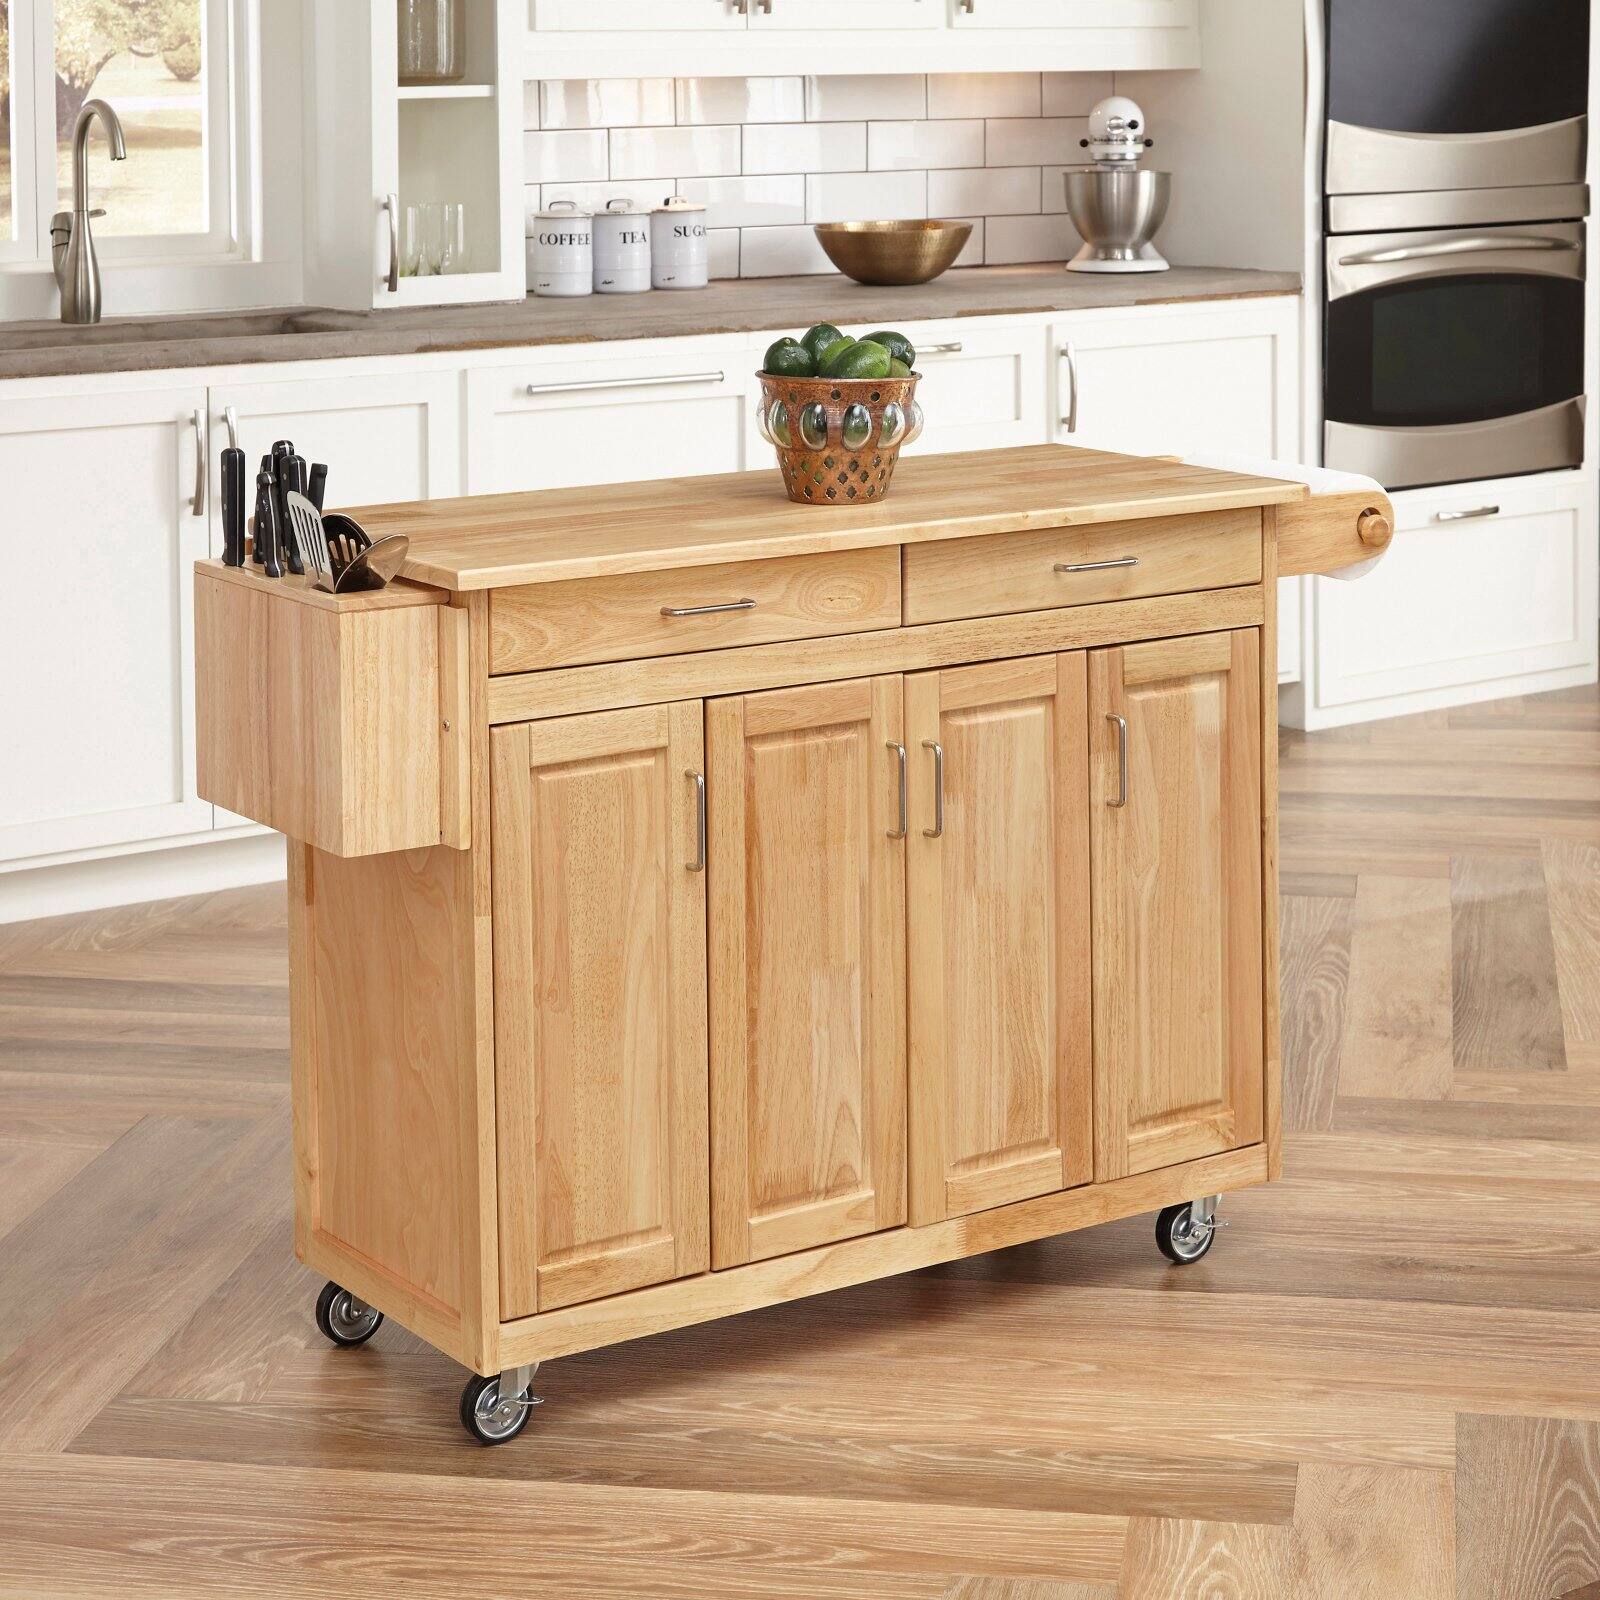 Homestyles General Line Wood Rolling Kitchen Cart in Brown - image 1 of 5